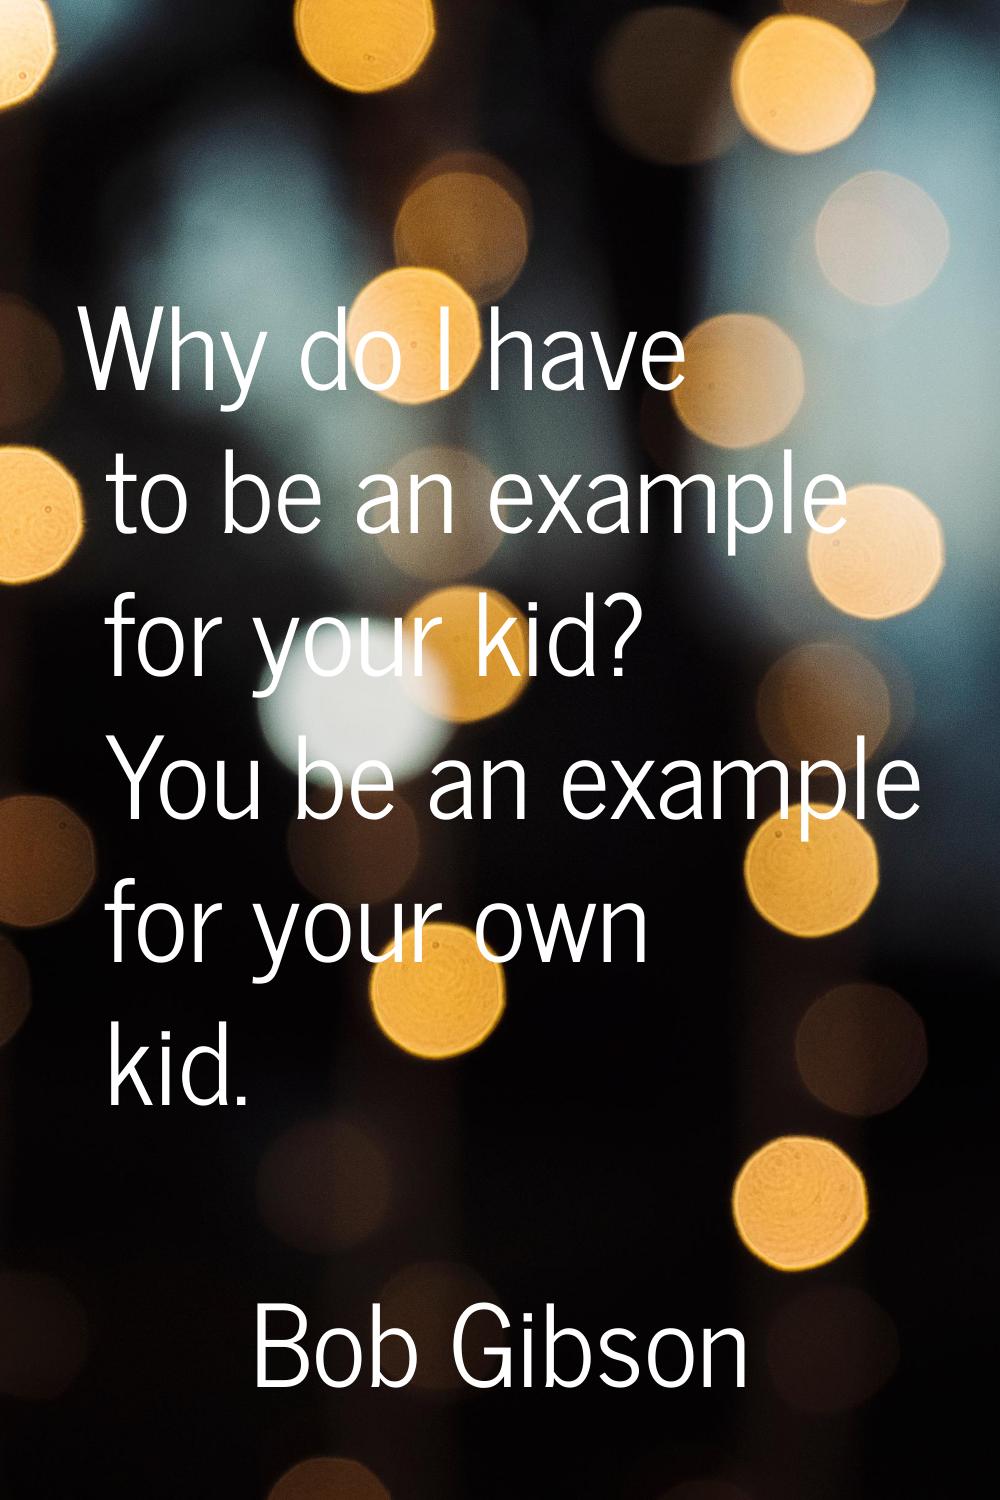 Why do I have to be an example for your kid? You be an example for your own kid.